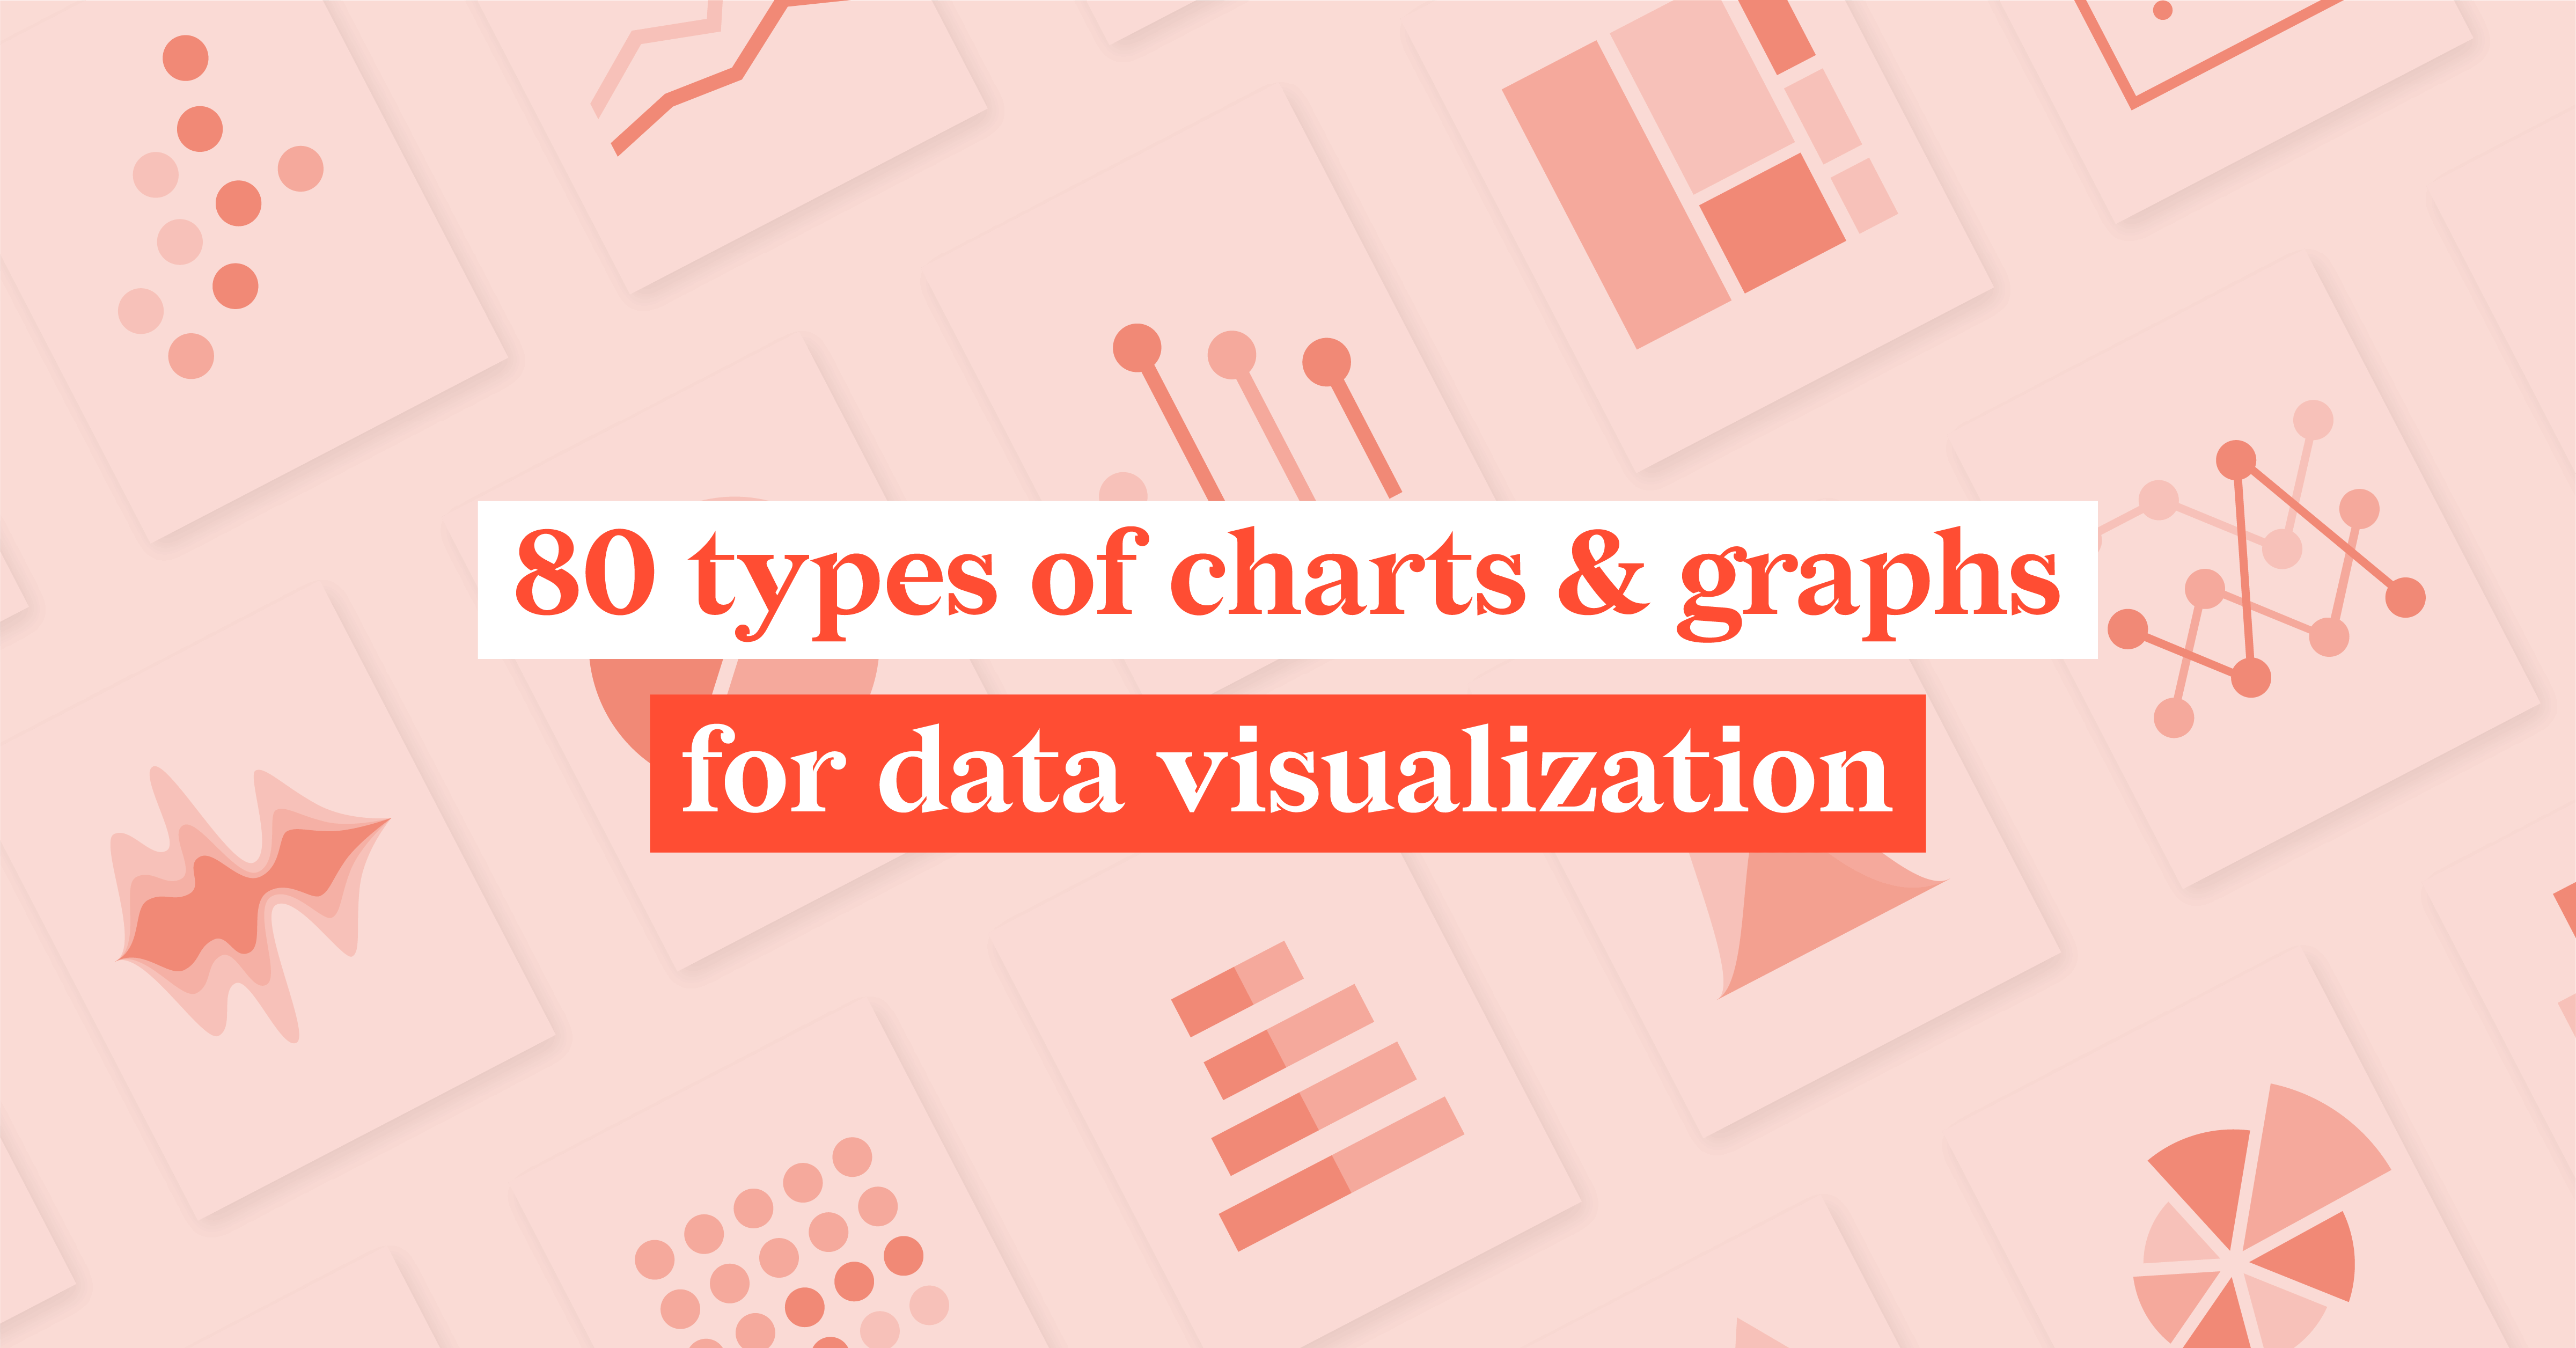 80 types of charts & graphs for data visualization (with examples)